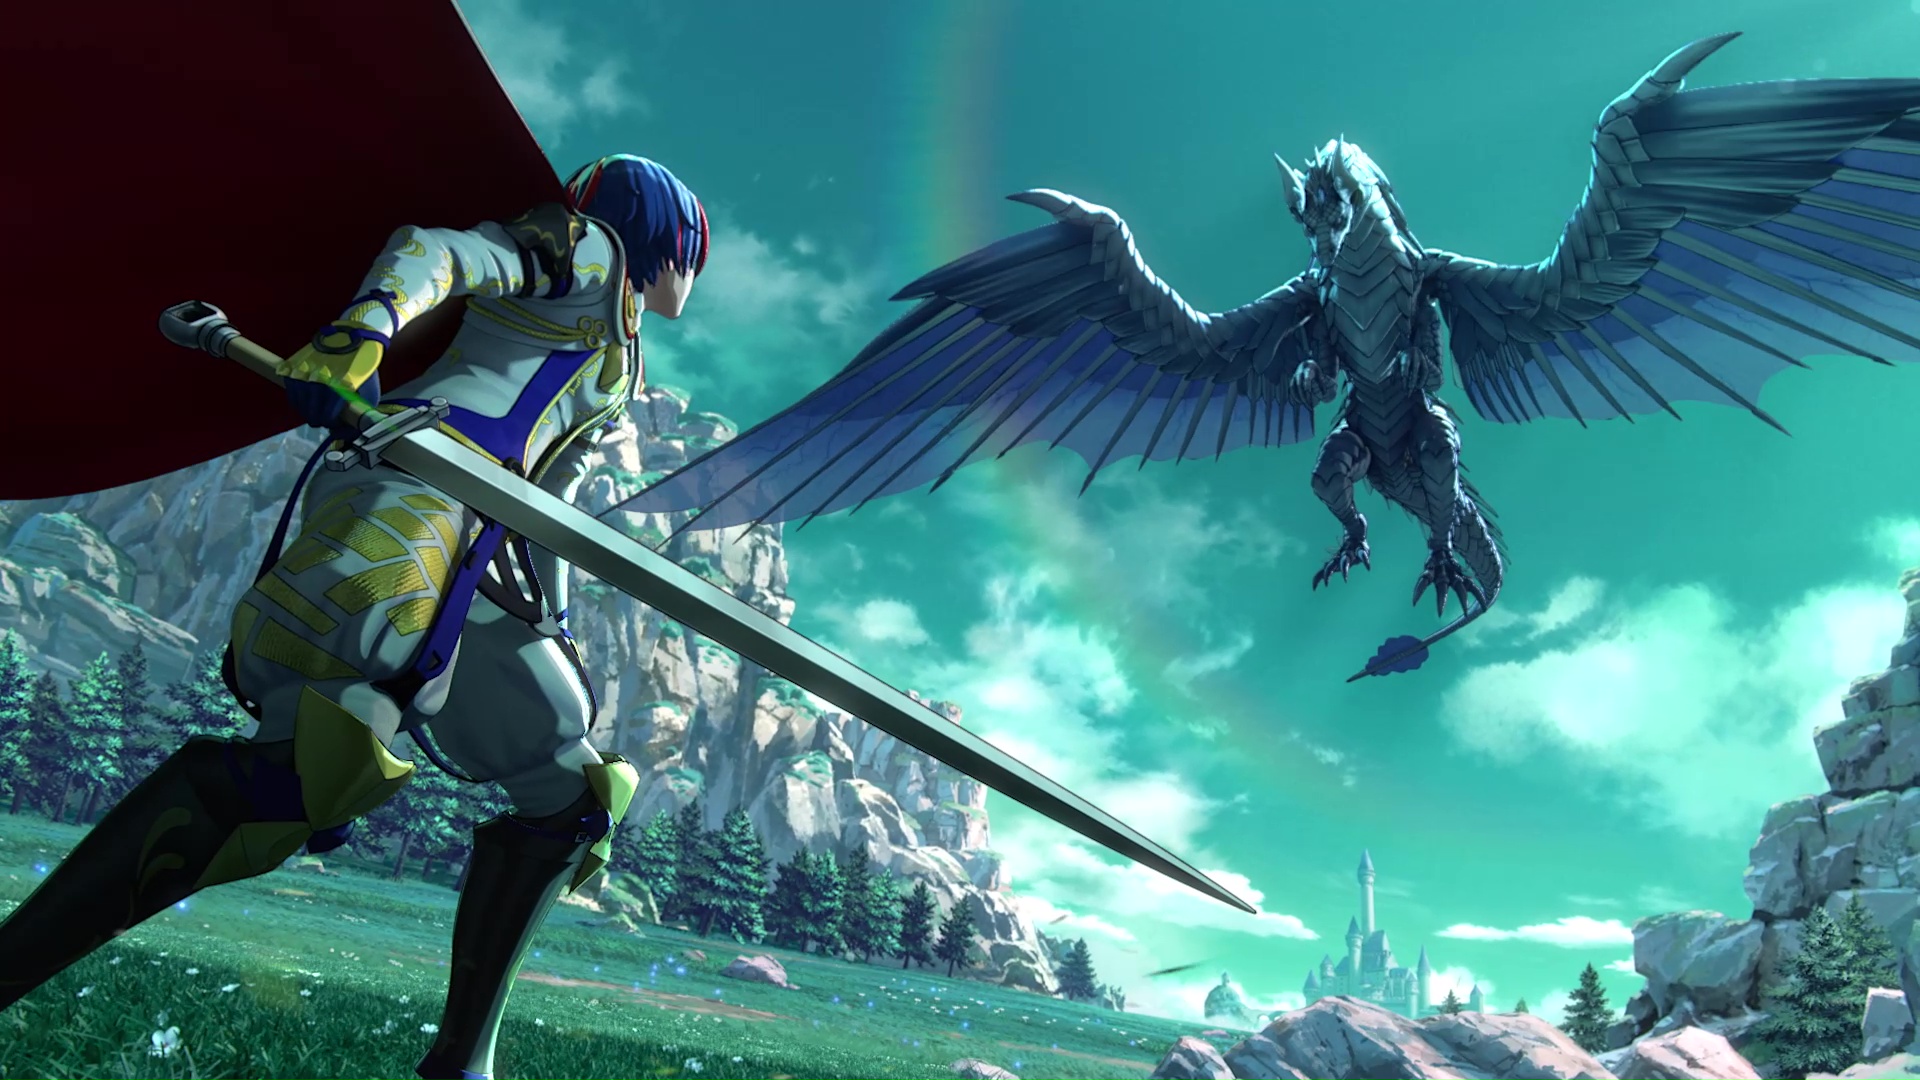 Fire Emblem Engage' Celebrates the Franchise's Future and All That Came Before